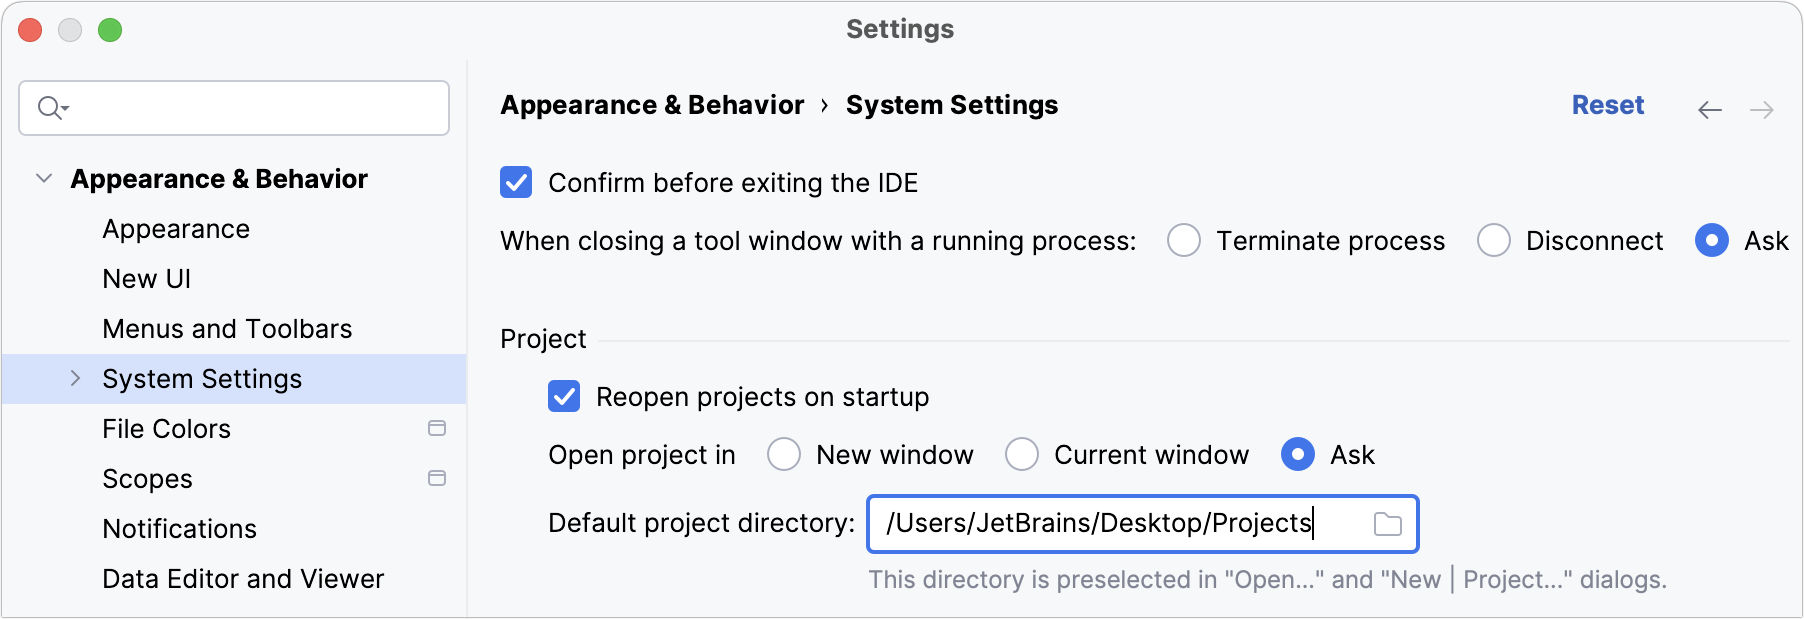 Changing the default location for projects